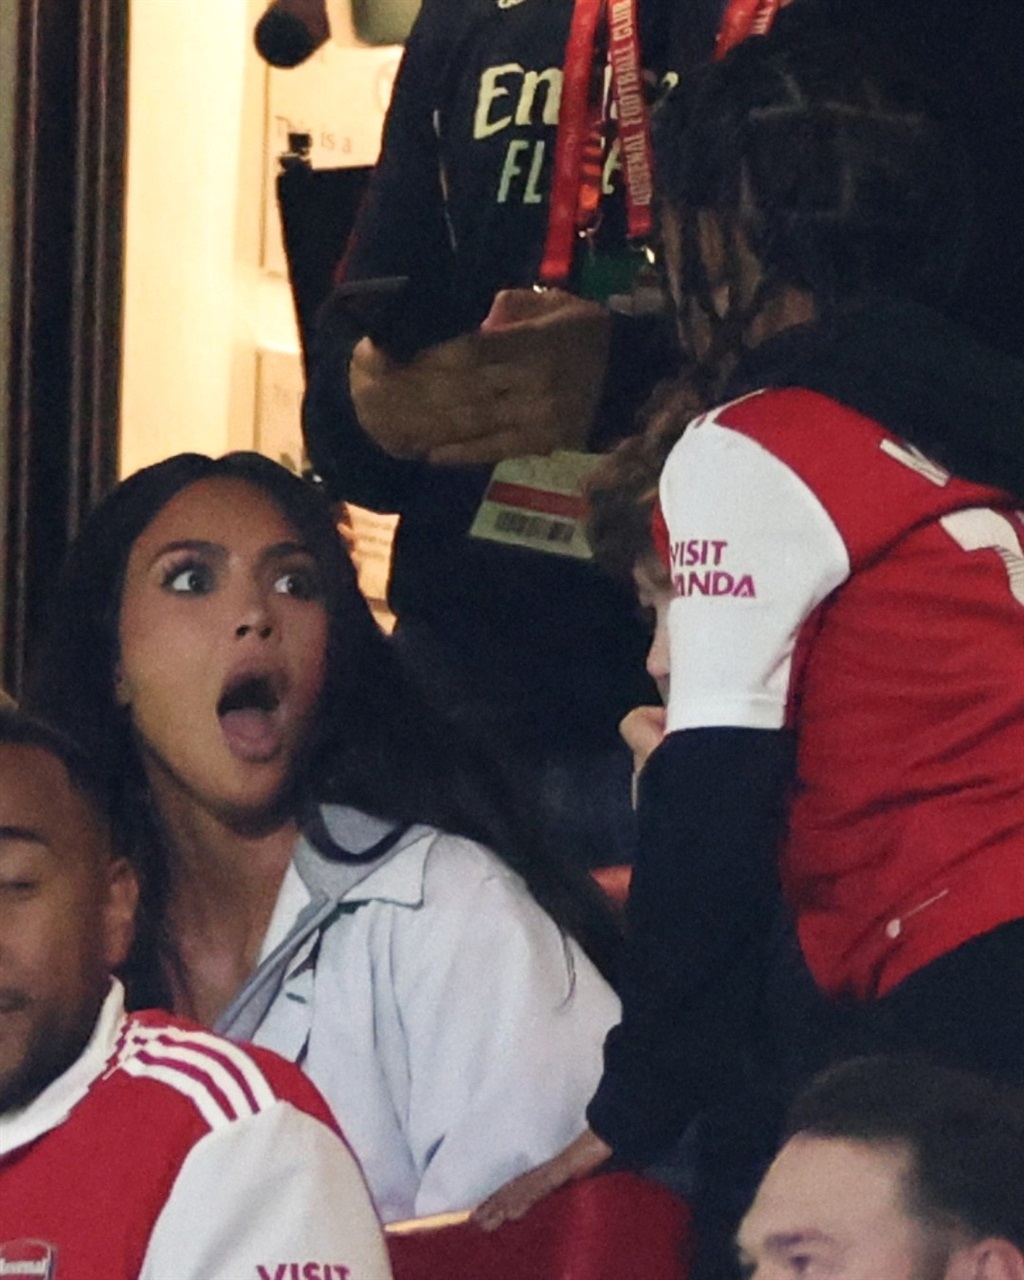 Kim Kardashian spotted at the Arsenal vs Sporting Lisbon game with her son Saint.